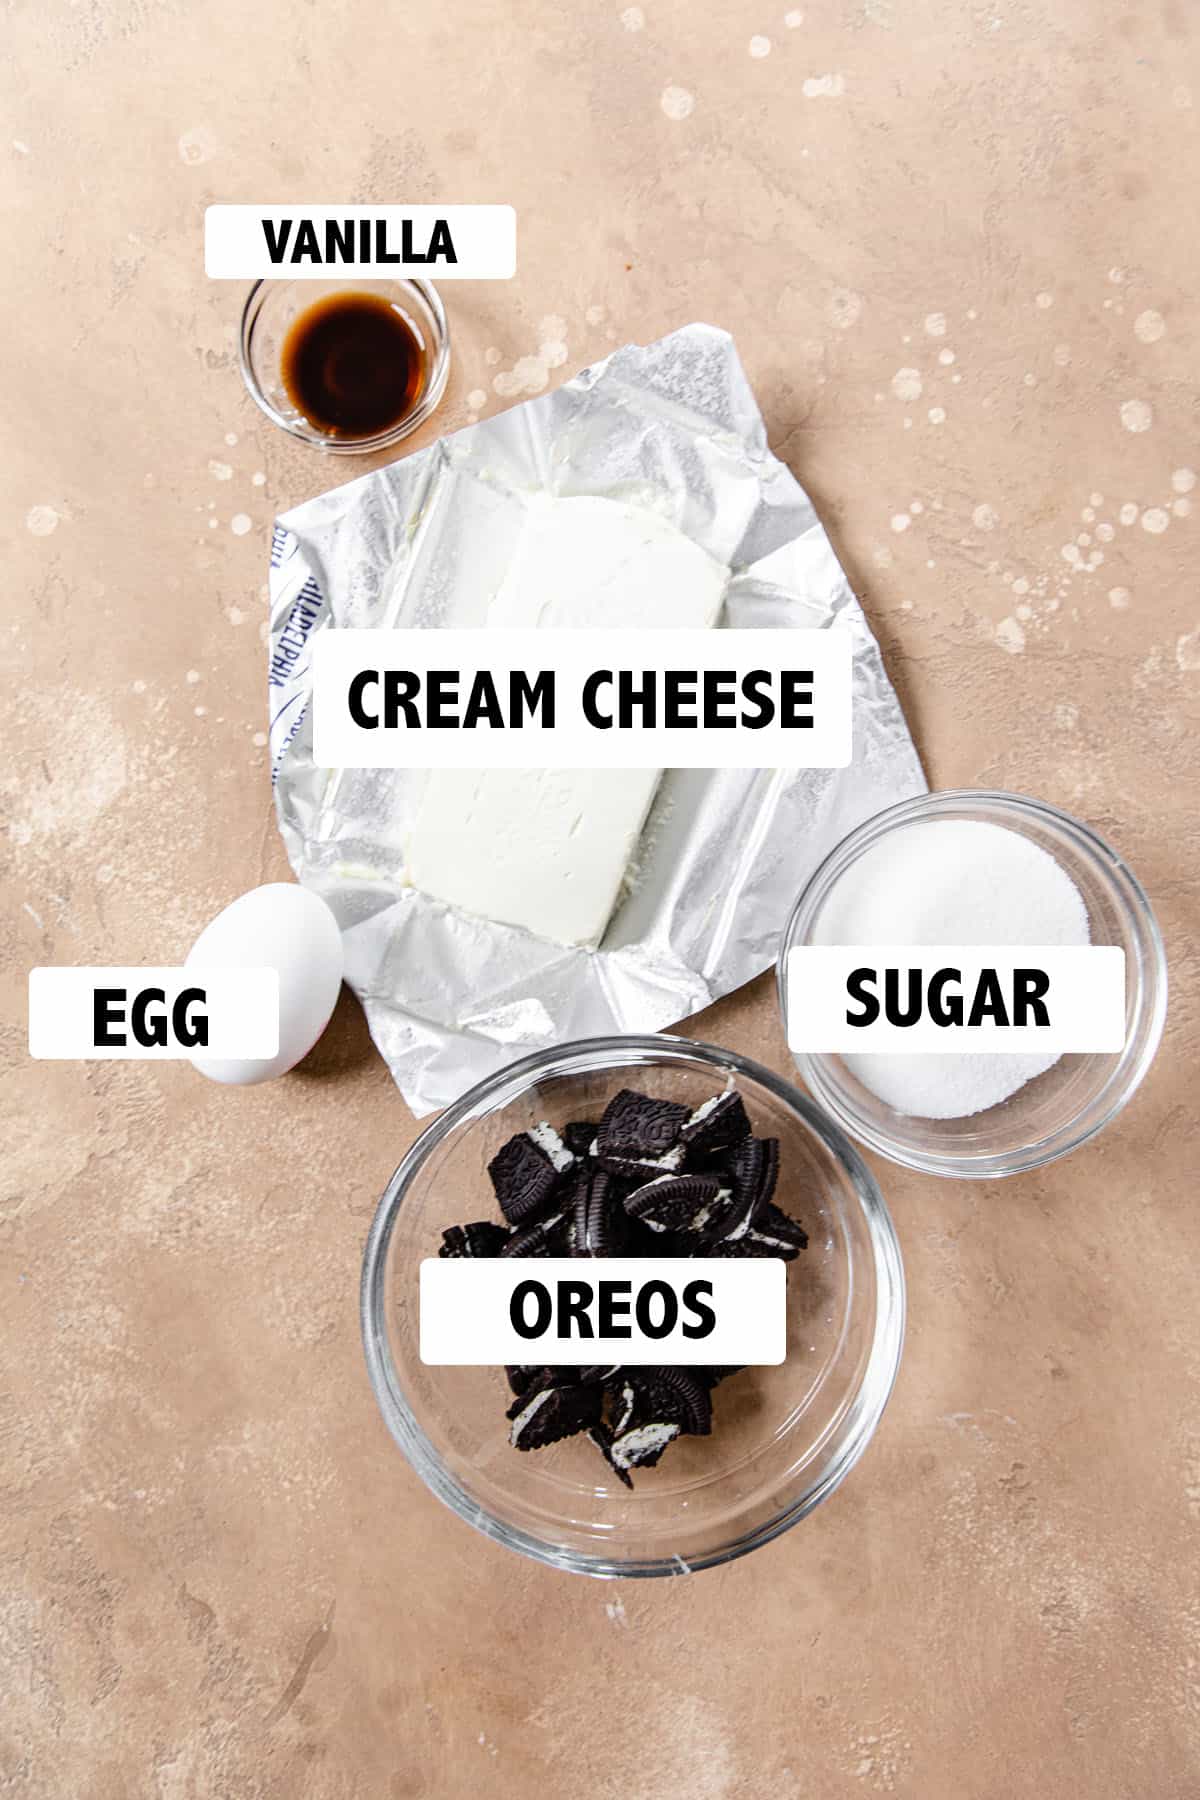 labeled ingredients for Oreo cheesecake